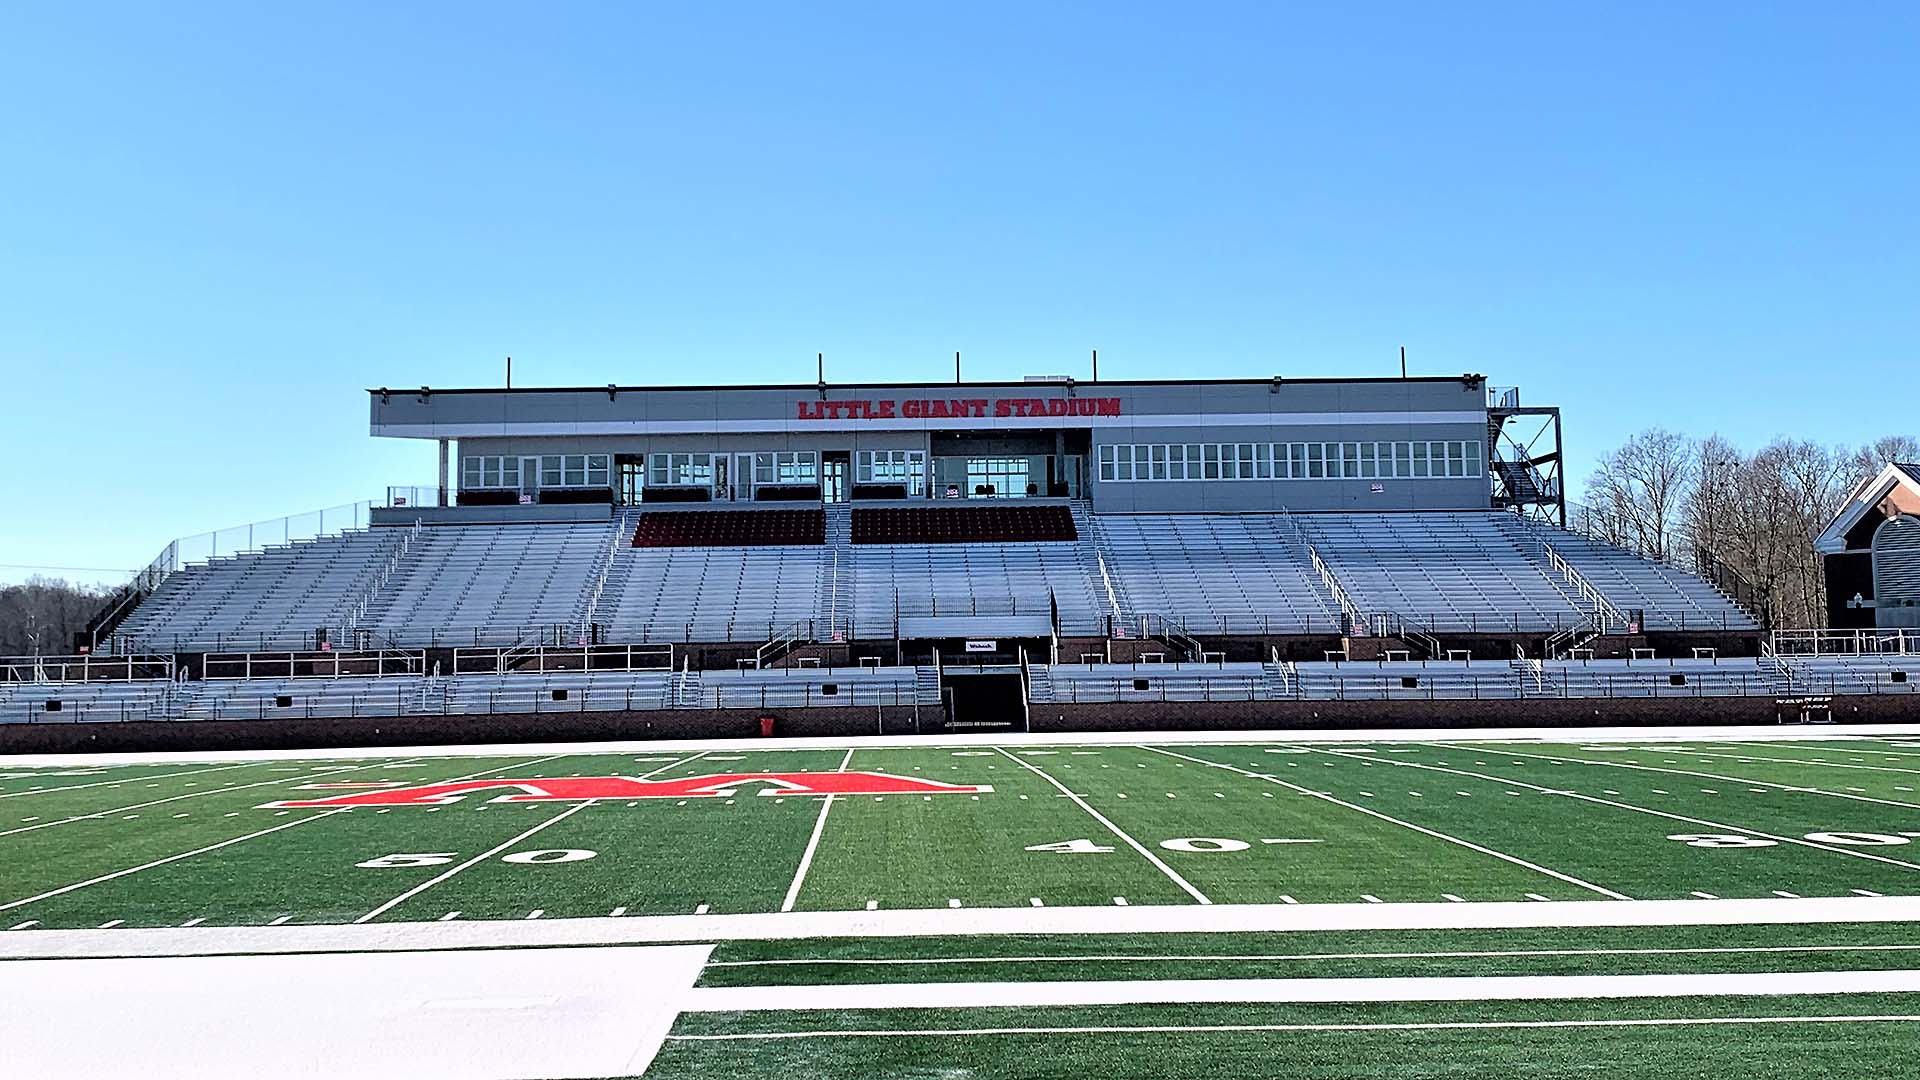 Football stadium bleachers at Wabash College, featuring an I-Beam grandstand with a press box.